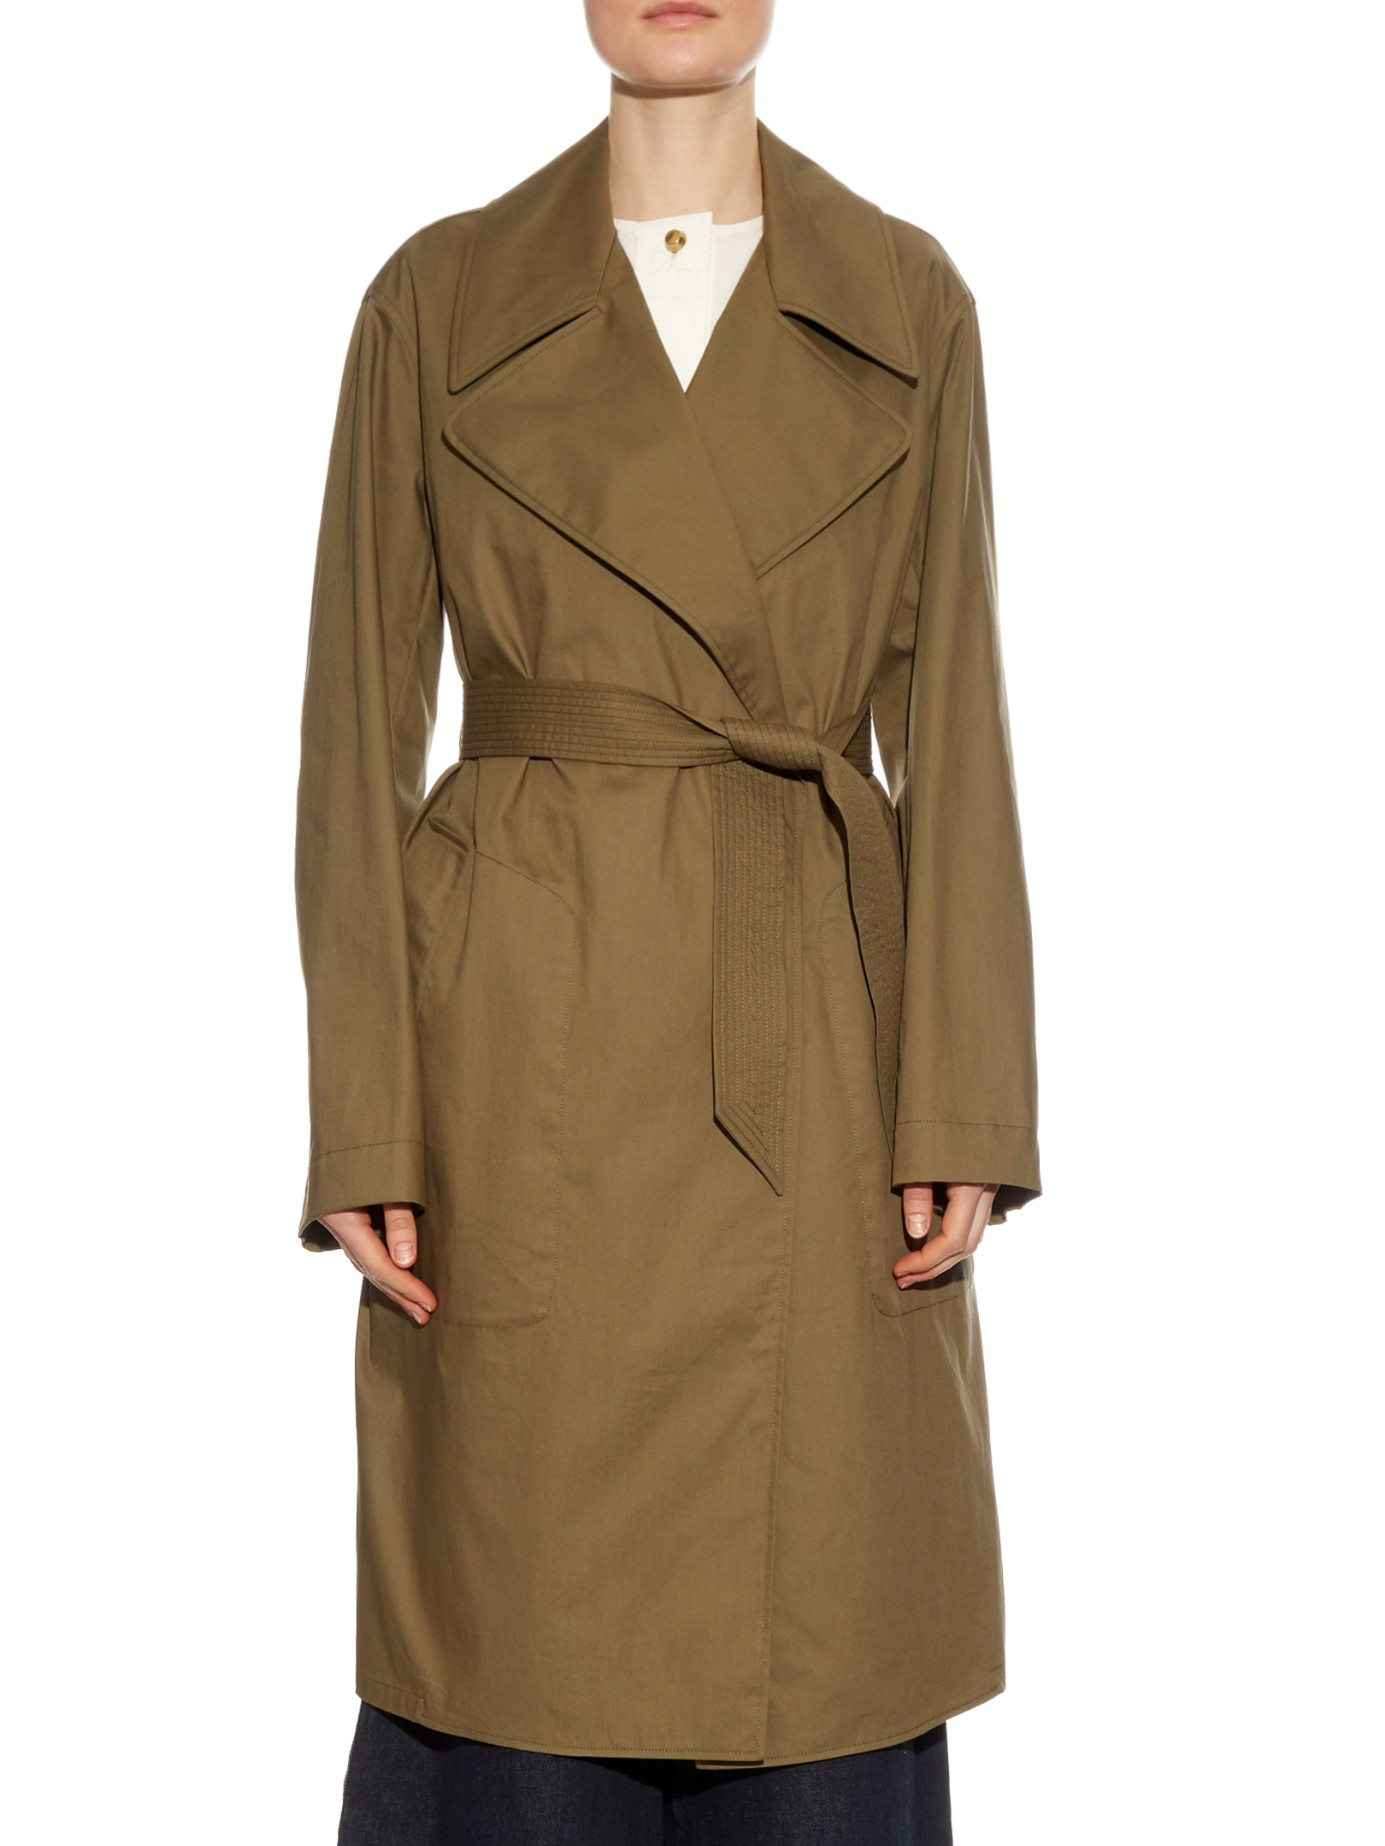 Lyst - Lemaire Water-repellent Cotton Trench Coat in Natural